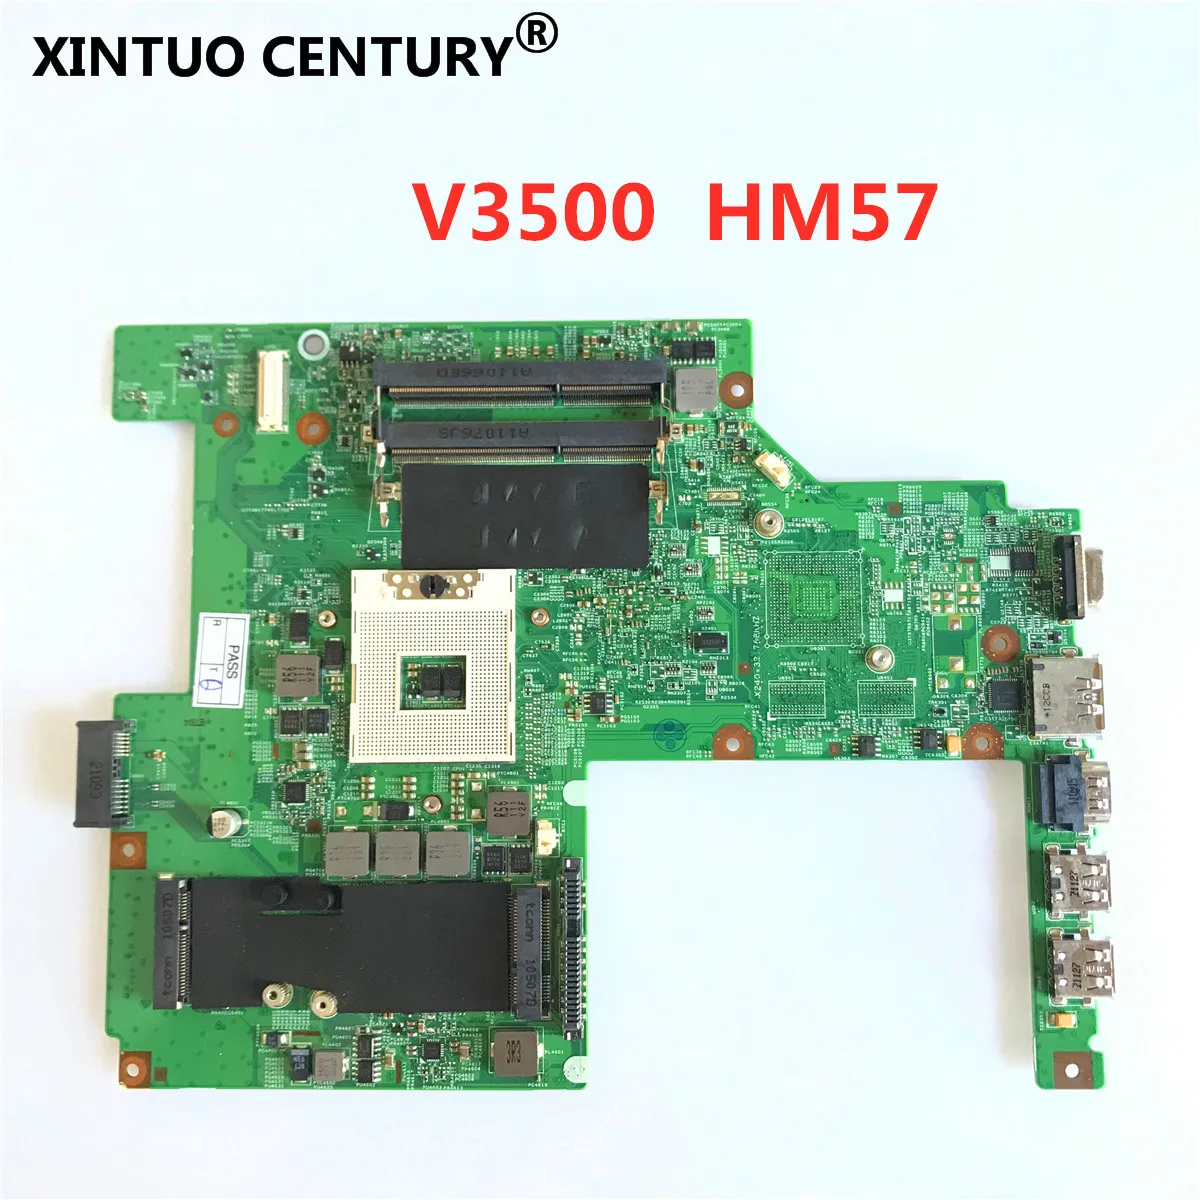 

CN-0PN6M9 PN6M9 FIT FOR DELL Vostro 3500 laptop motherboard V3500 mainboard HM57 NOTEBOOK PC 100% tested ok